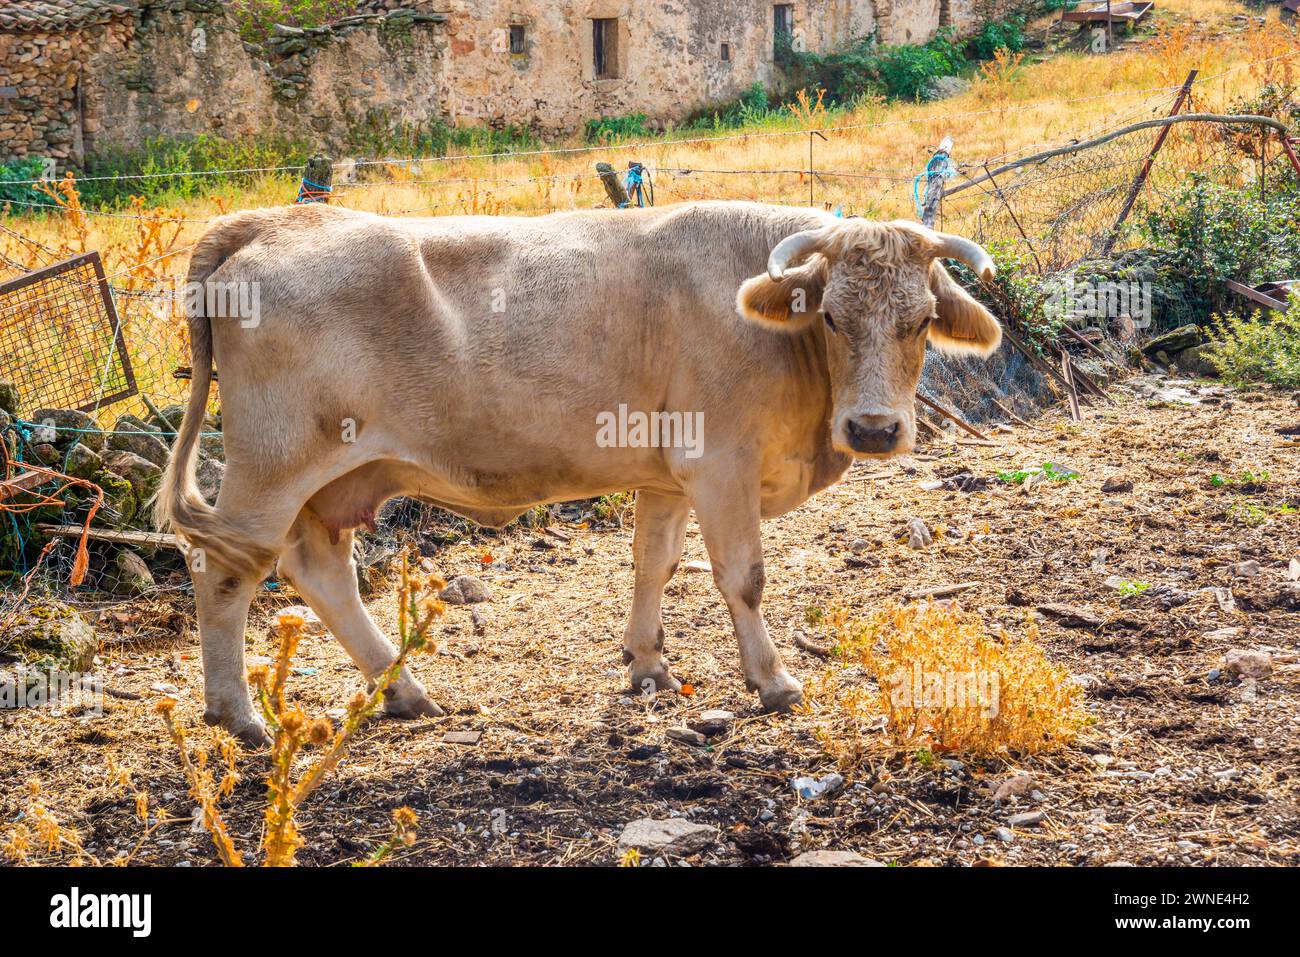 Cow in a pen. Piñuecar, Madrid province, Spain. Stock Photo